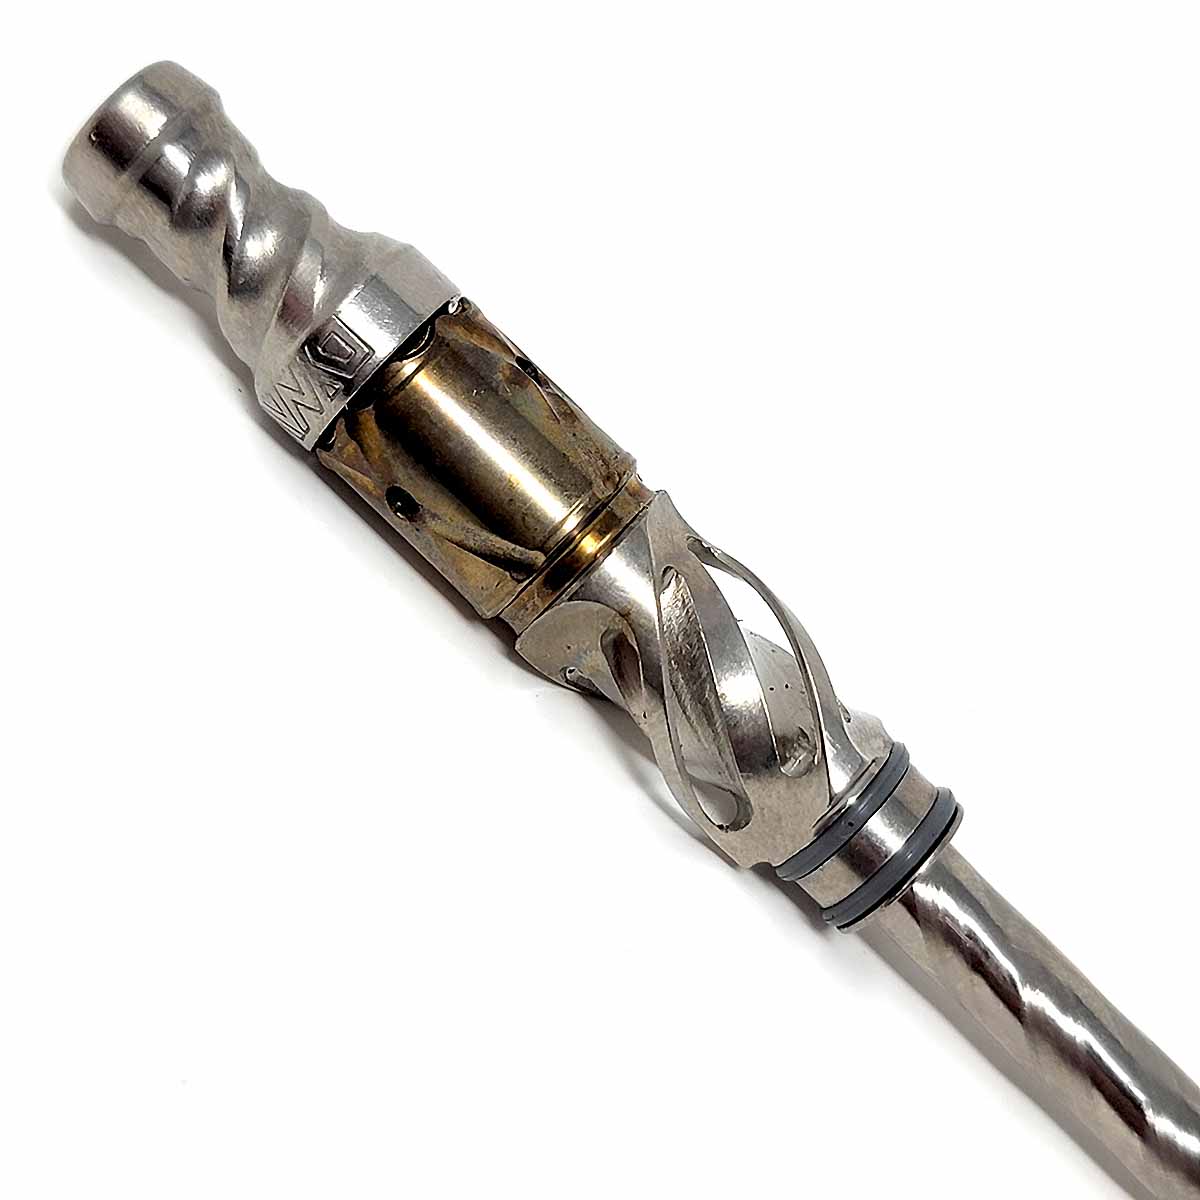 How to set the half-pack setting with the Woodwynd Mouthpiece and Helix Tip